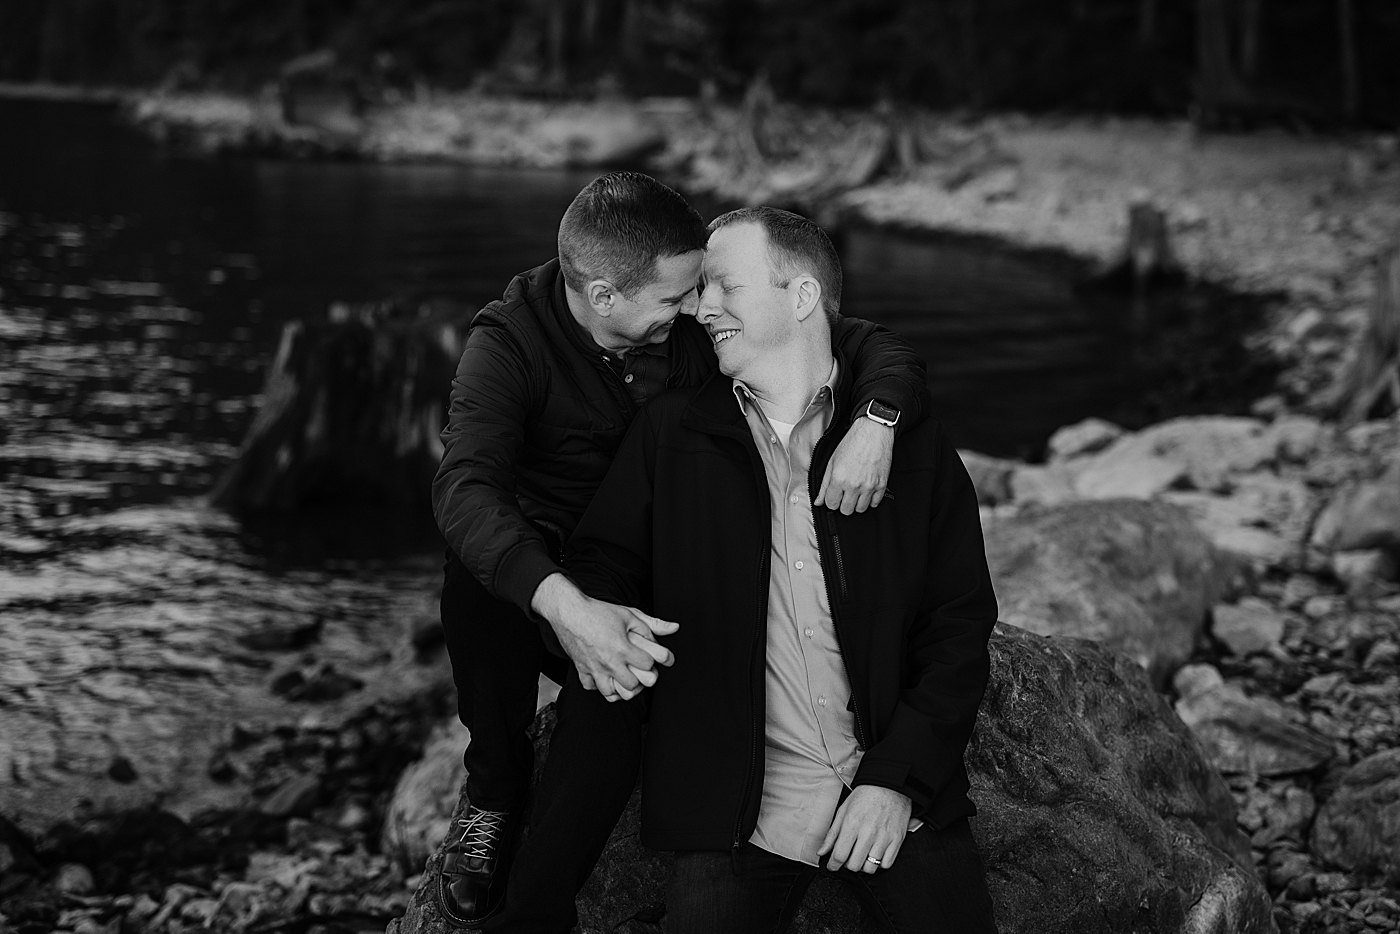 Black and white portrait of couple embracing during engagement session. Photo by Megan Montalvo Photography.